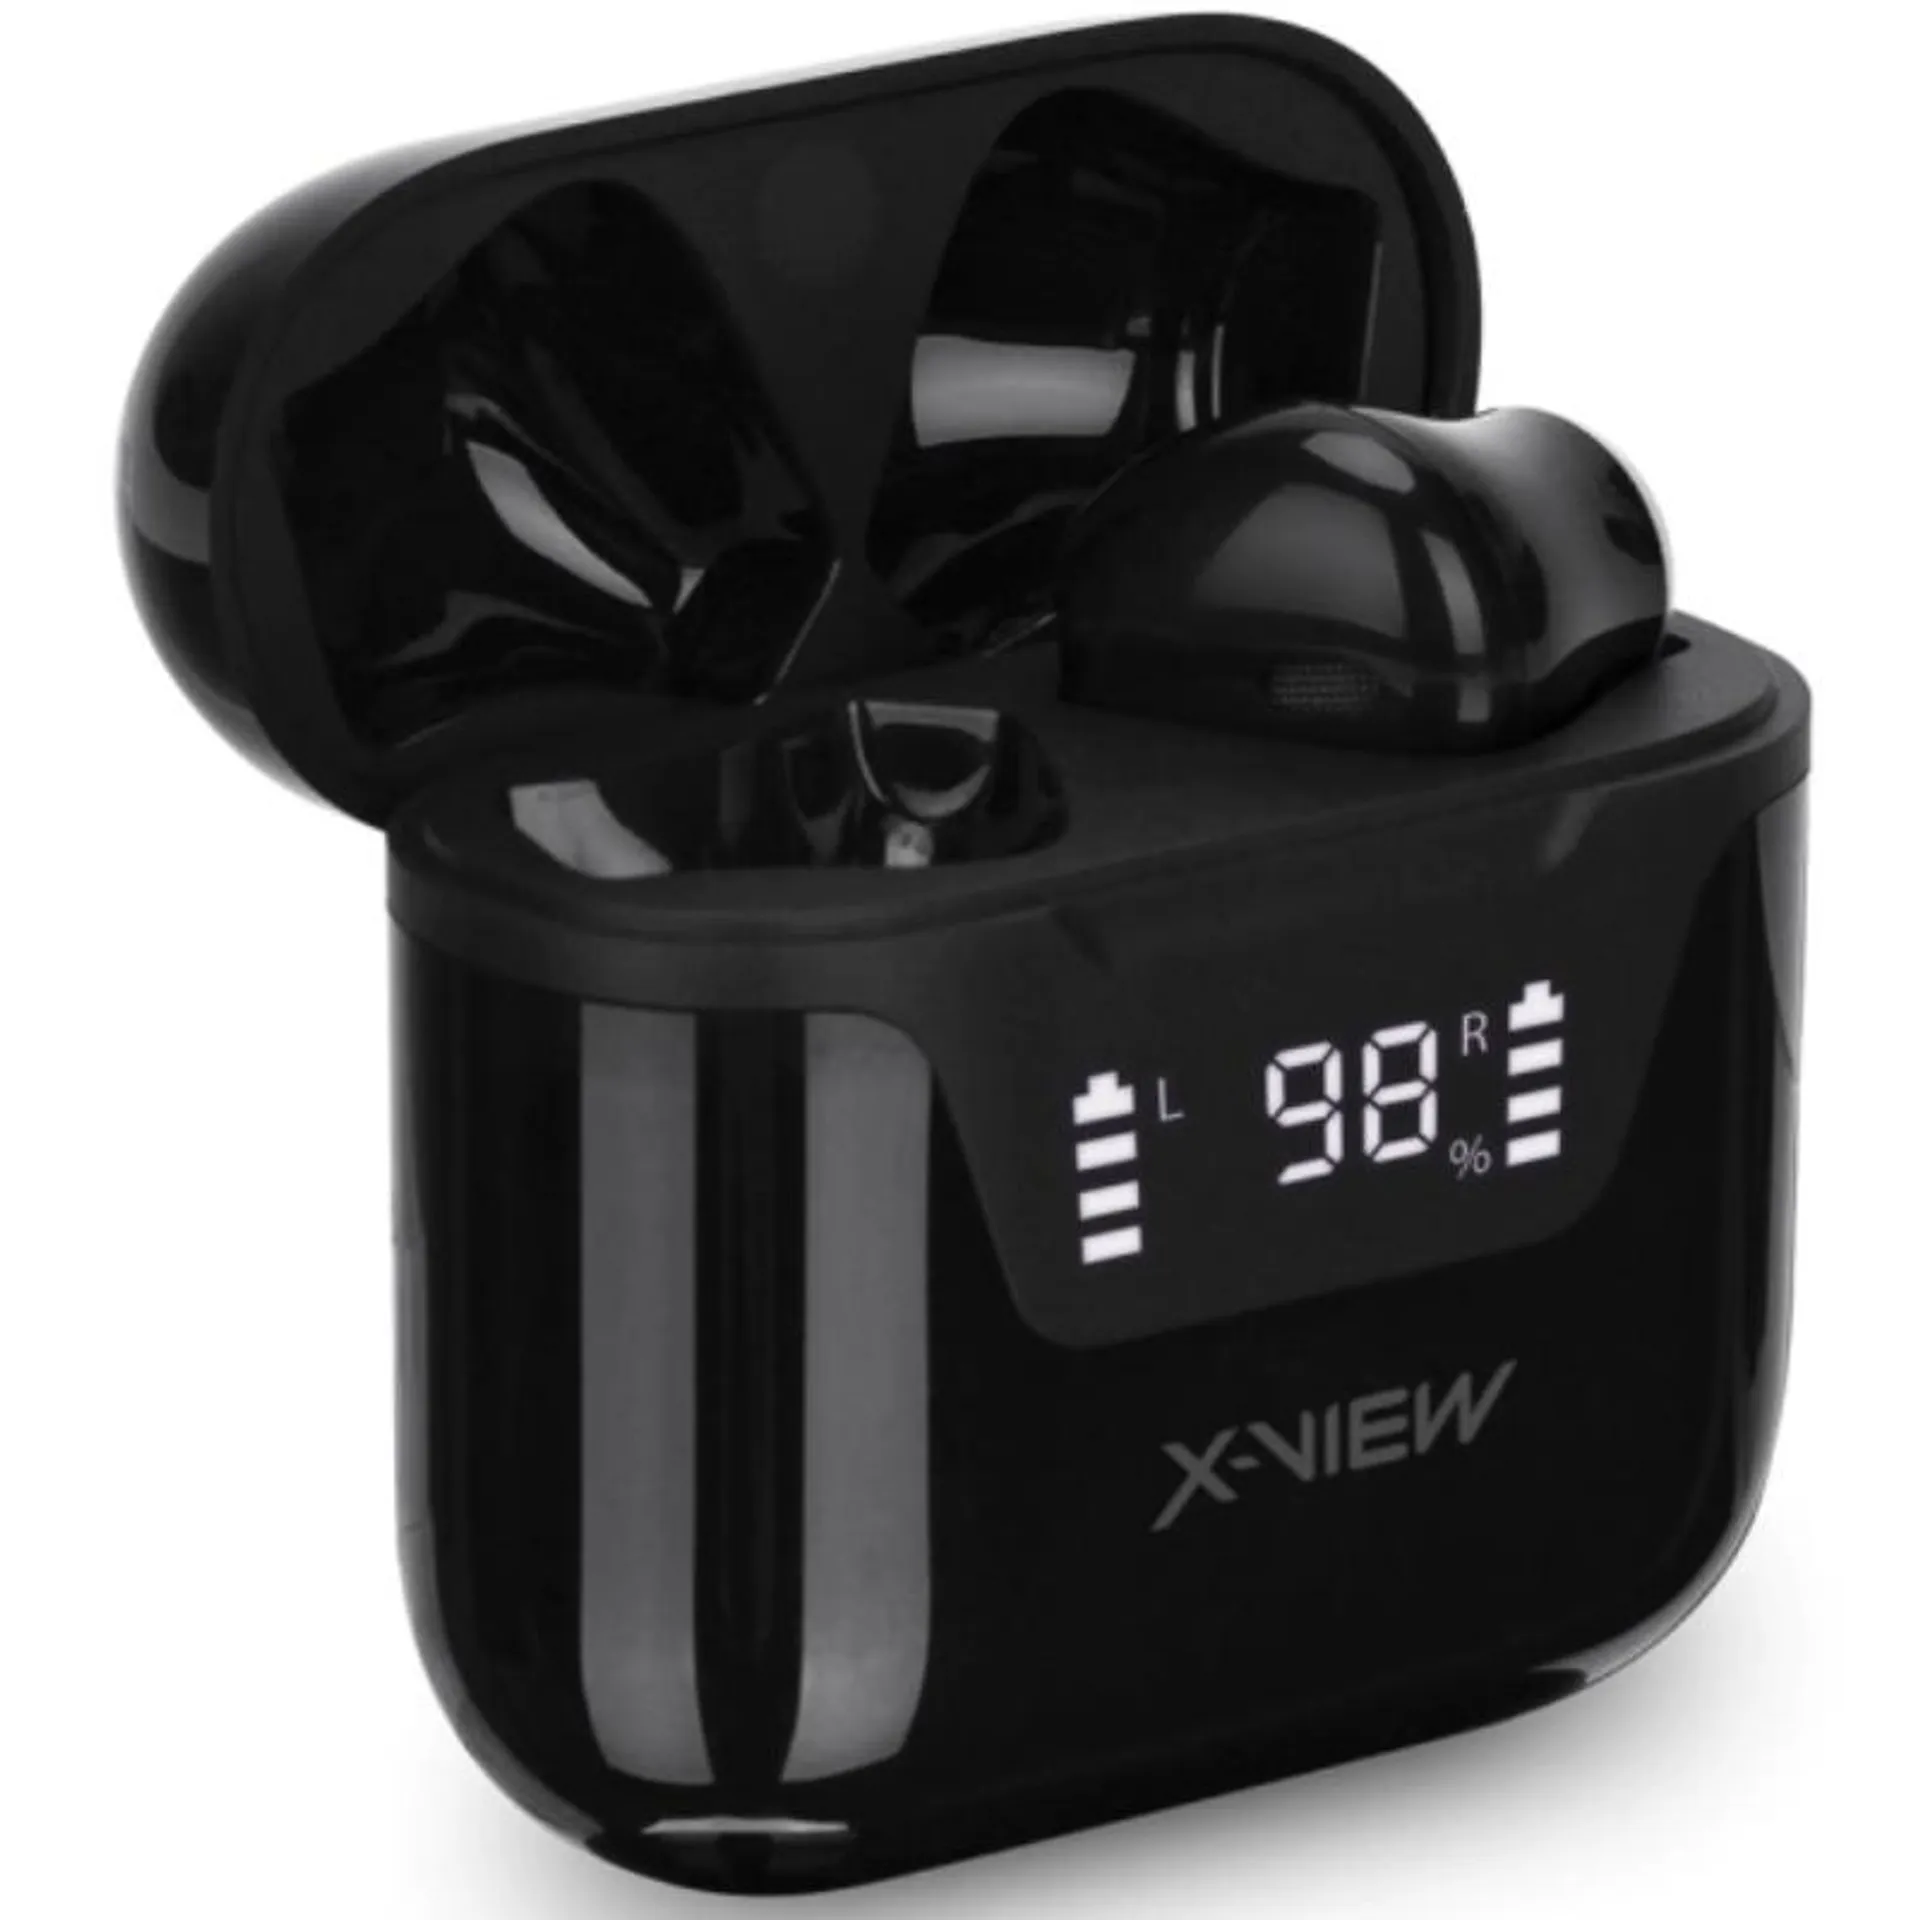 AURICULAR X-VIEW IN EAR BLUETOOTH XPODS 3 NEGRO